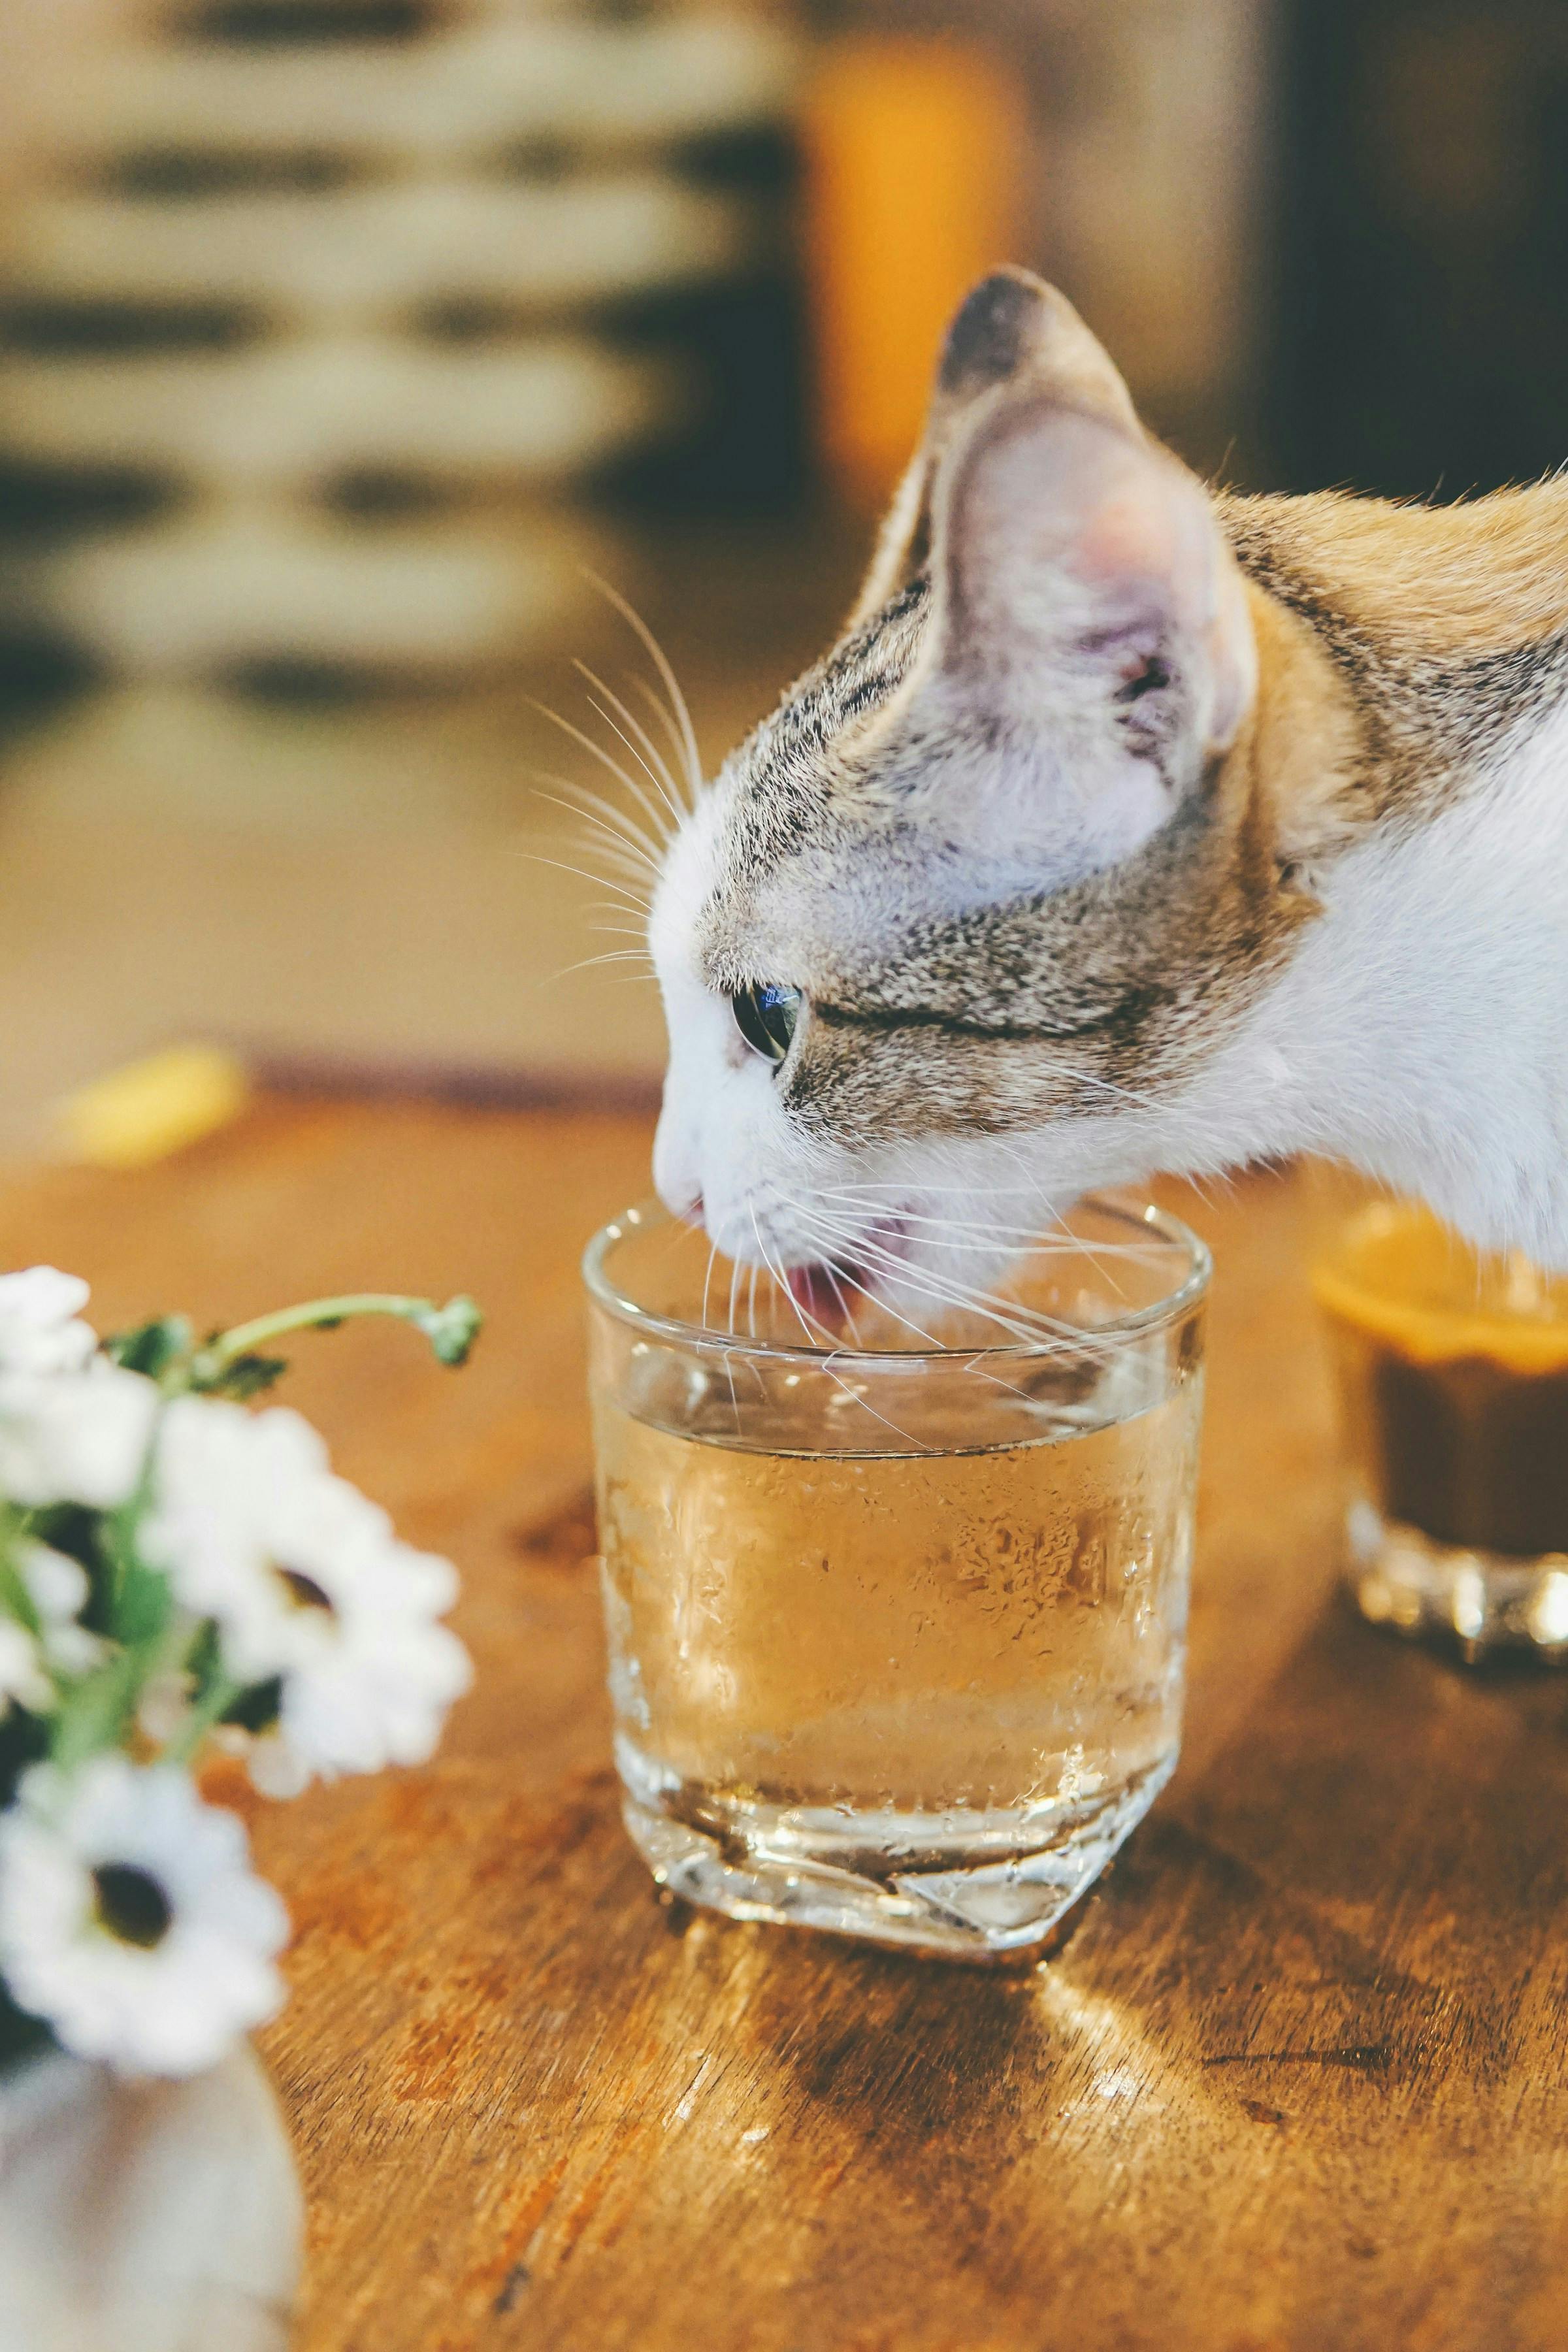 How Much Water Should Your Cat Drink Daily?